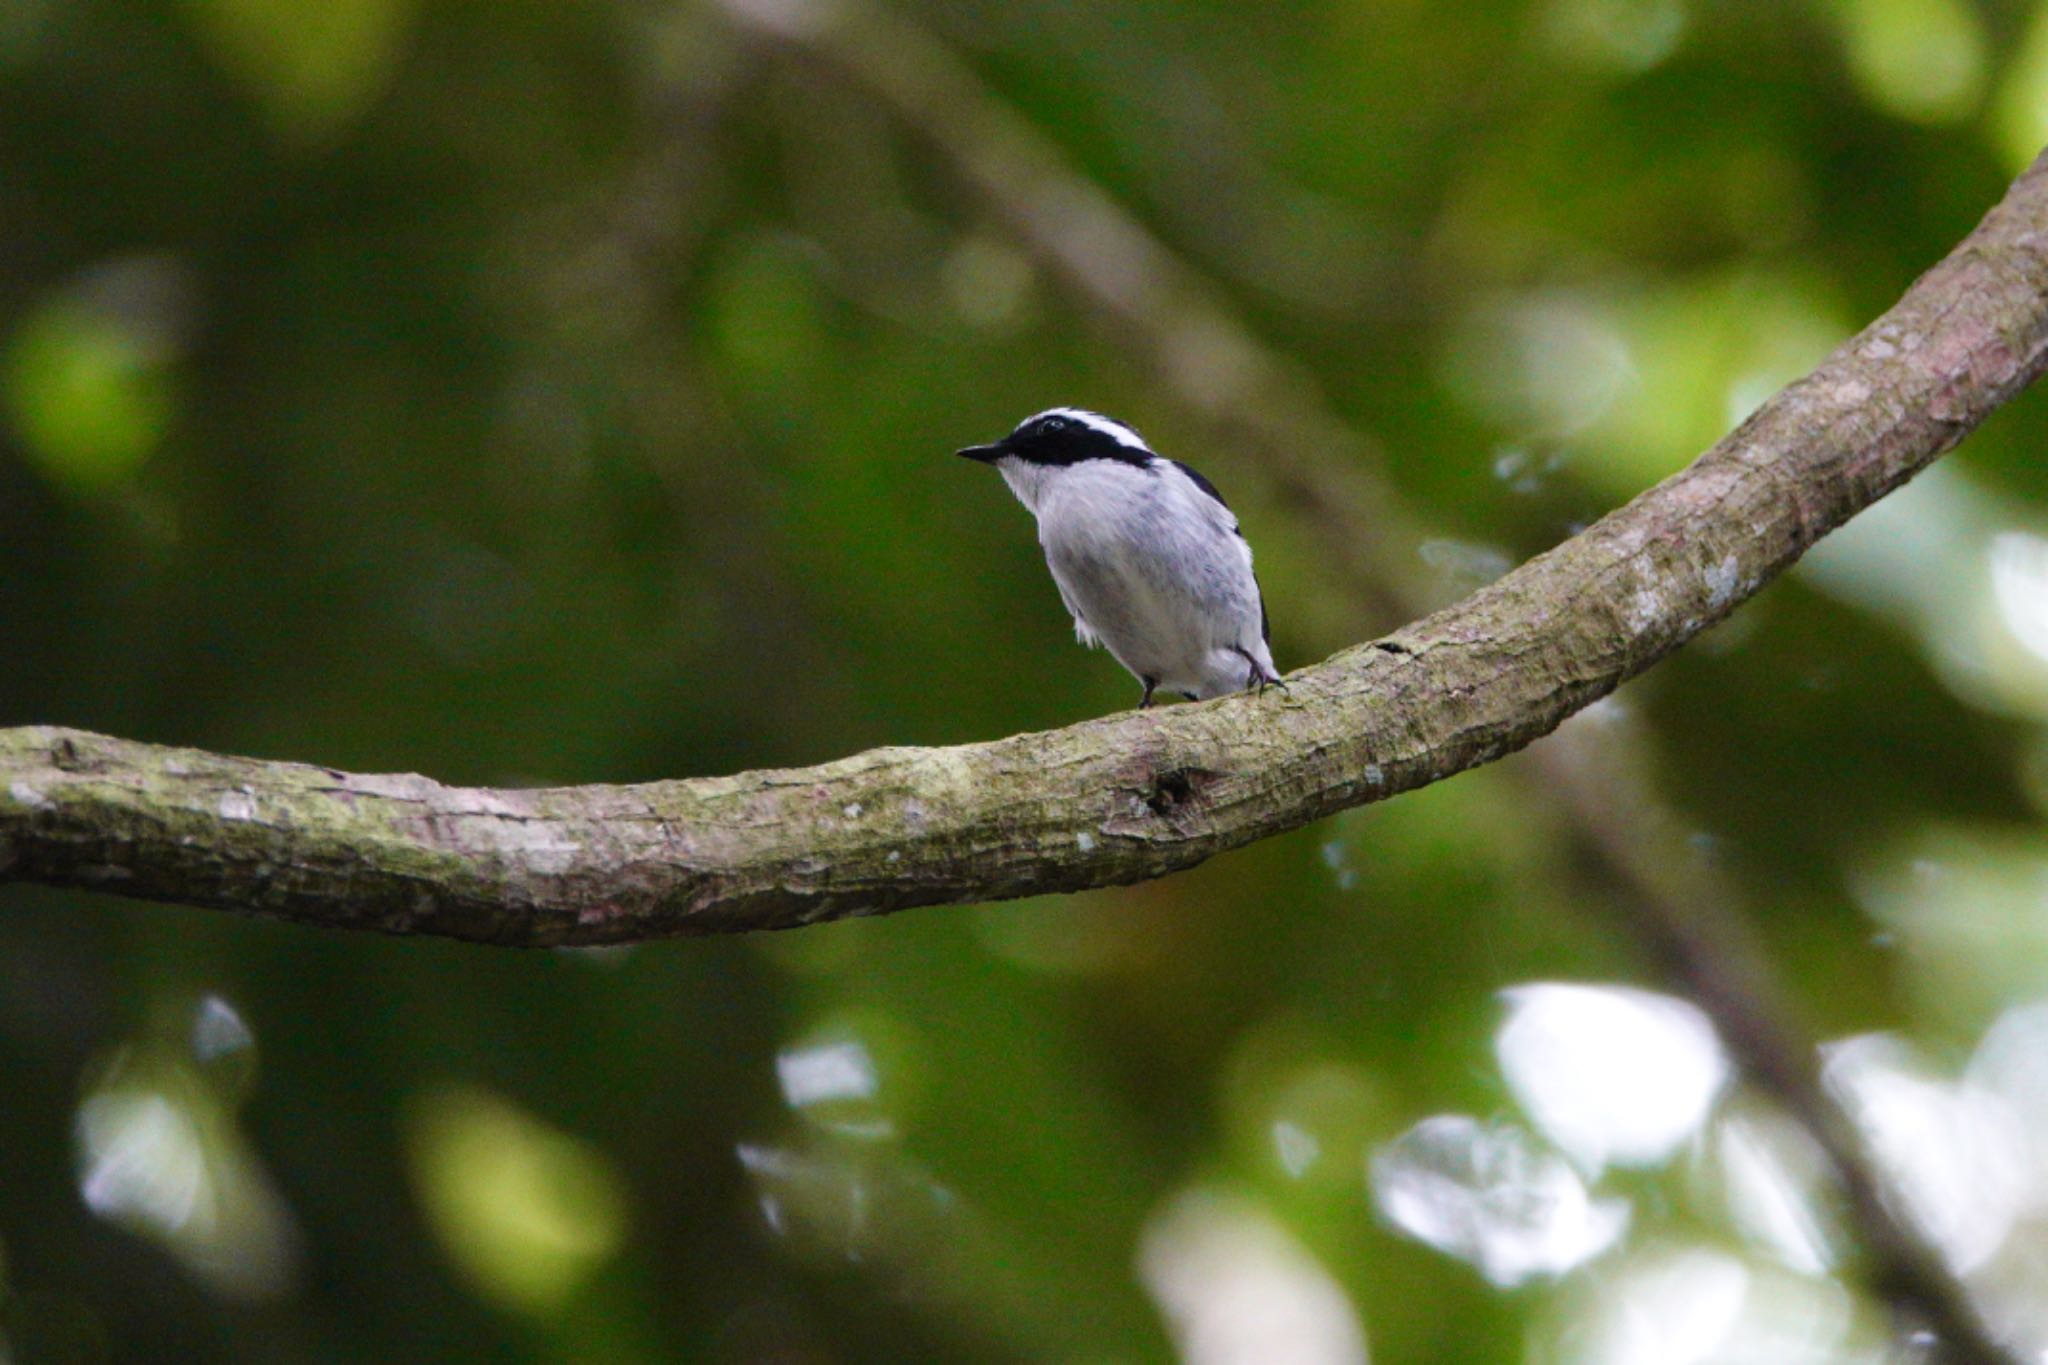 Photo of Little Pied Flycatcher at Fraser's Hill by のどか